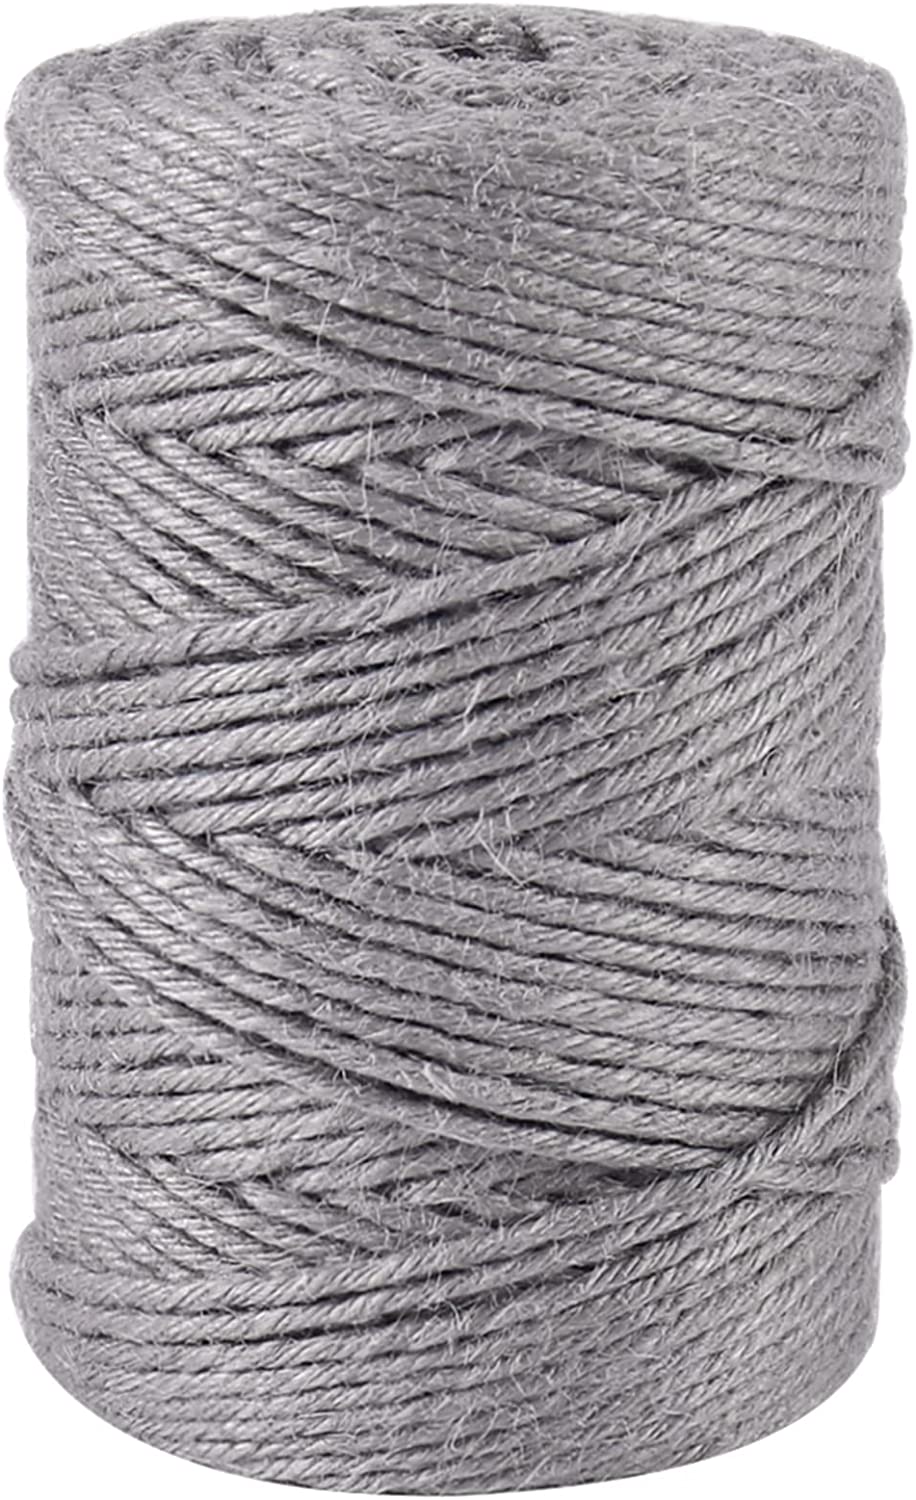 Jute Twine 3mm Thick 328 Feet Heavy Duty Natural Jute Rope String for Home  Garde